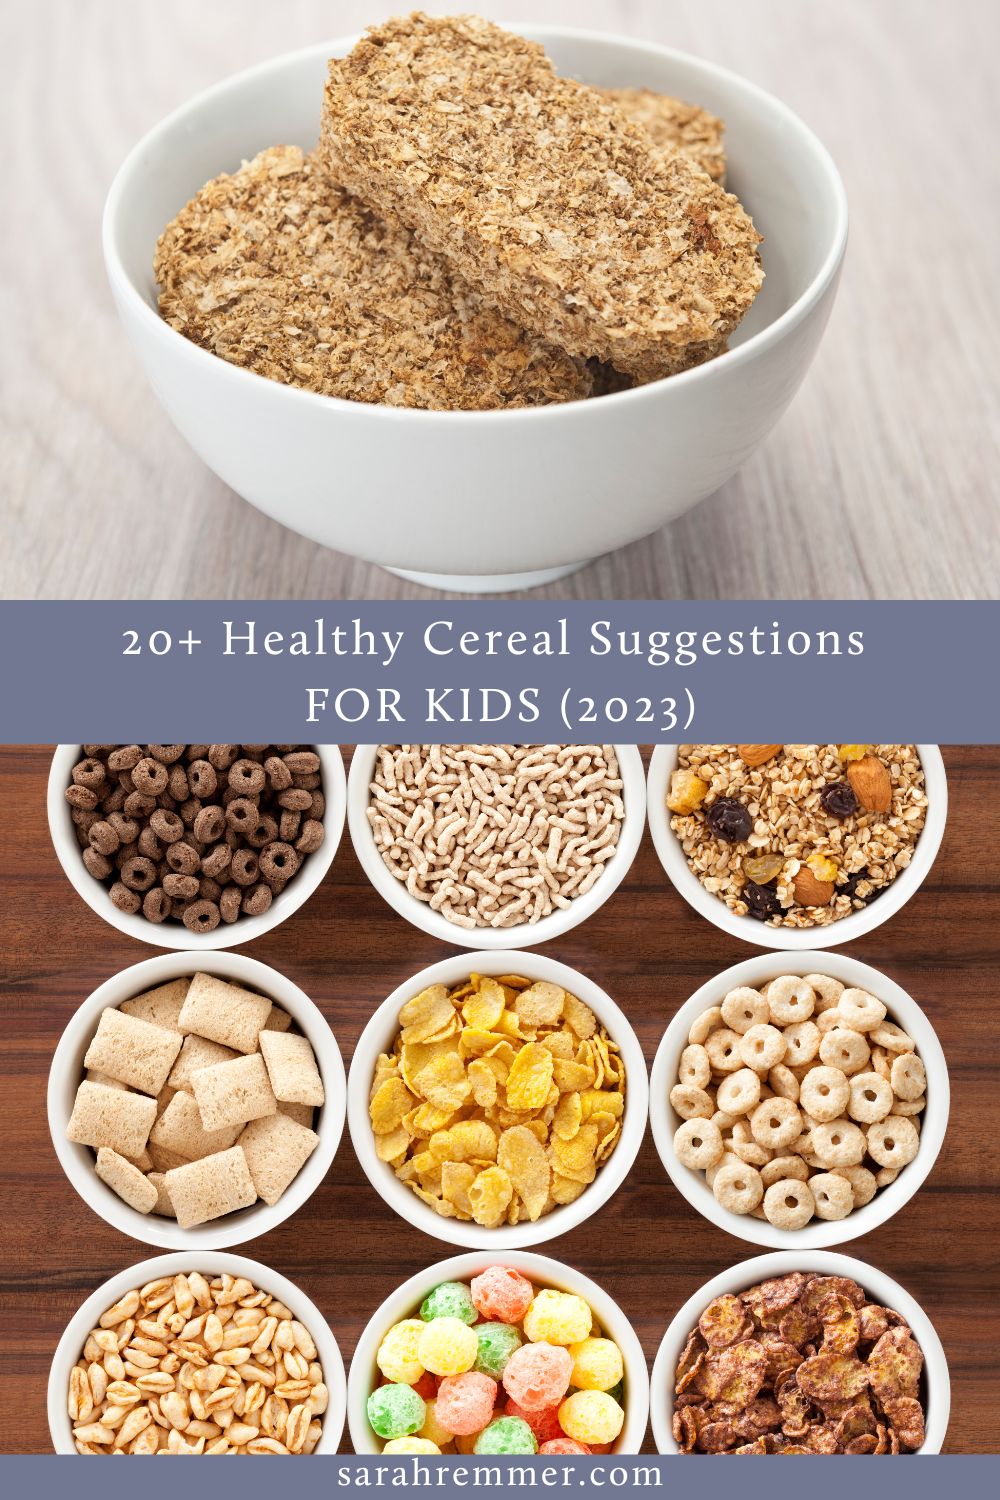 Looking for healthy cereal suggestions for your kids? As a registered dietitian and mom of three, I'm sharing my top nutritious options!